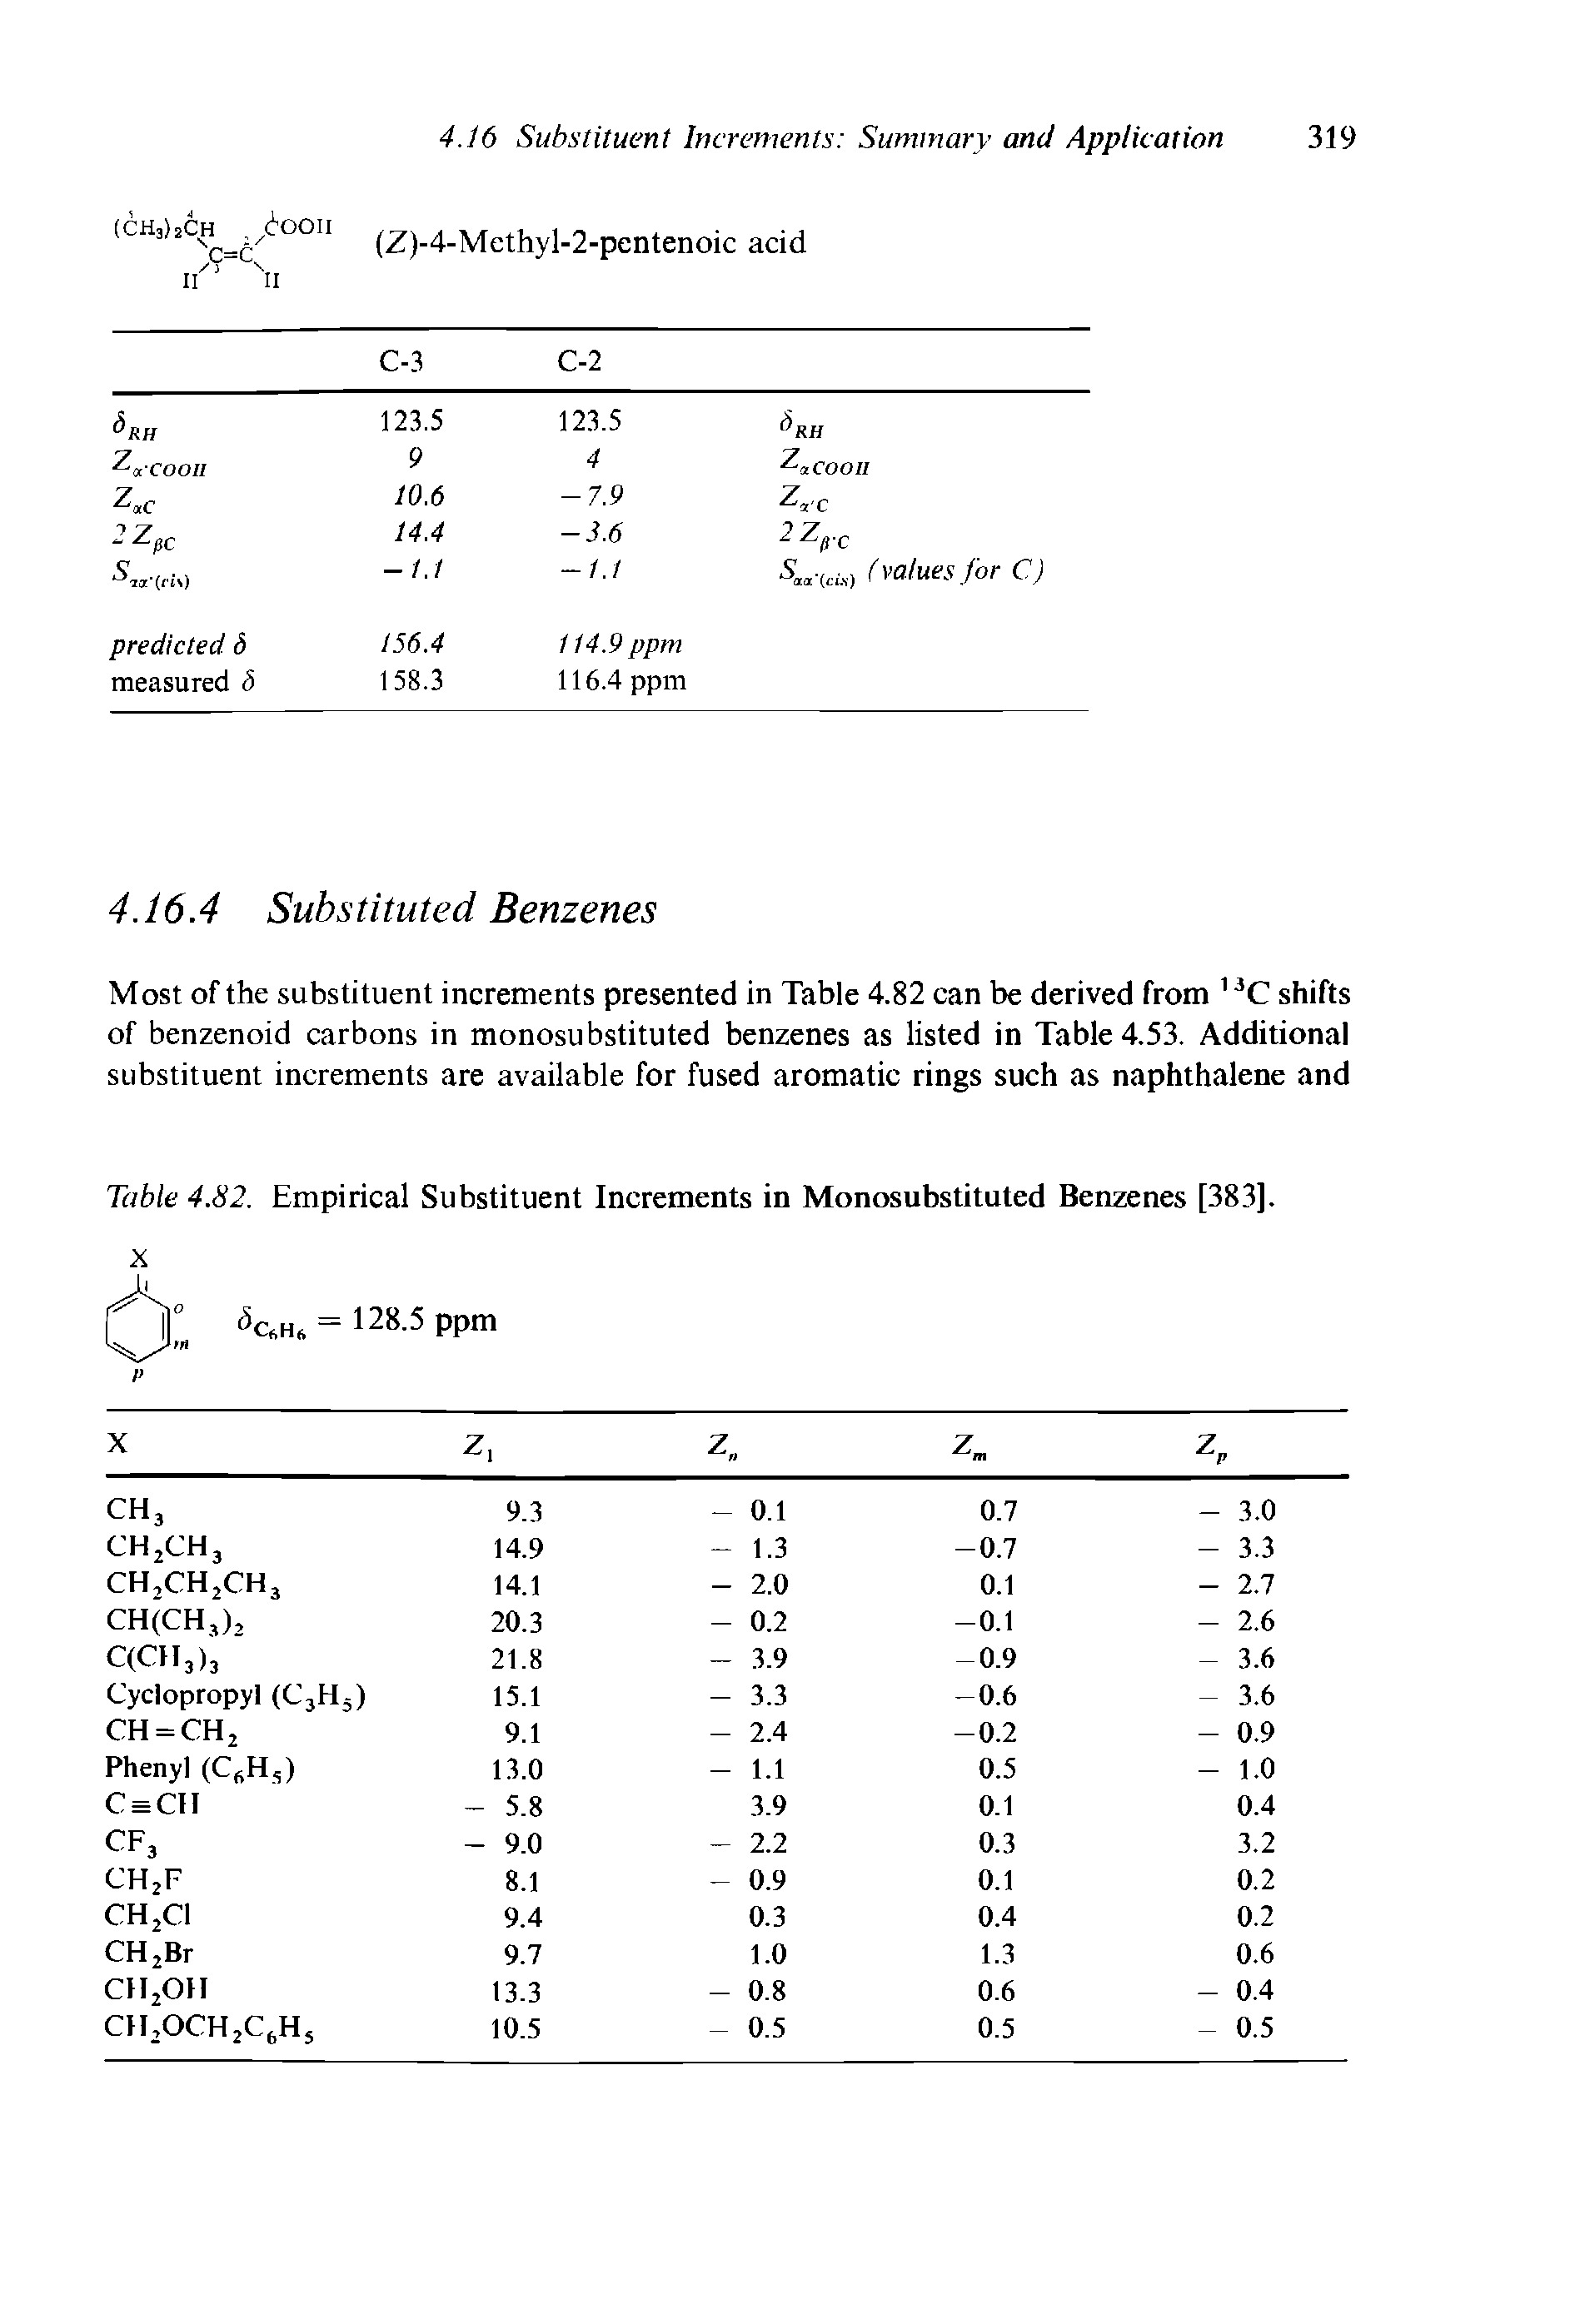 Table 4.82. Empirical Substituent Increments in Monosubstituted Benzenes [383].